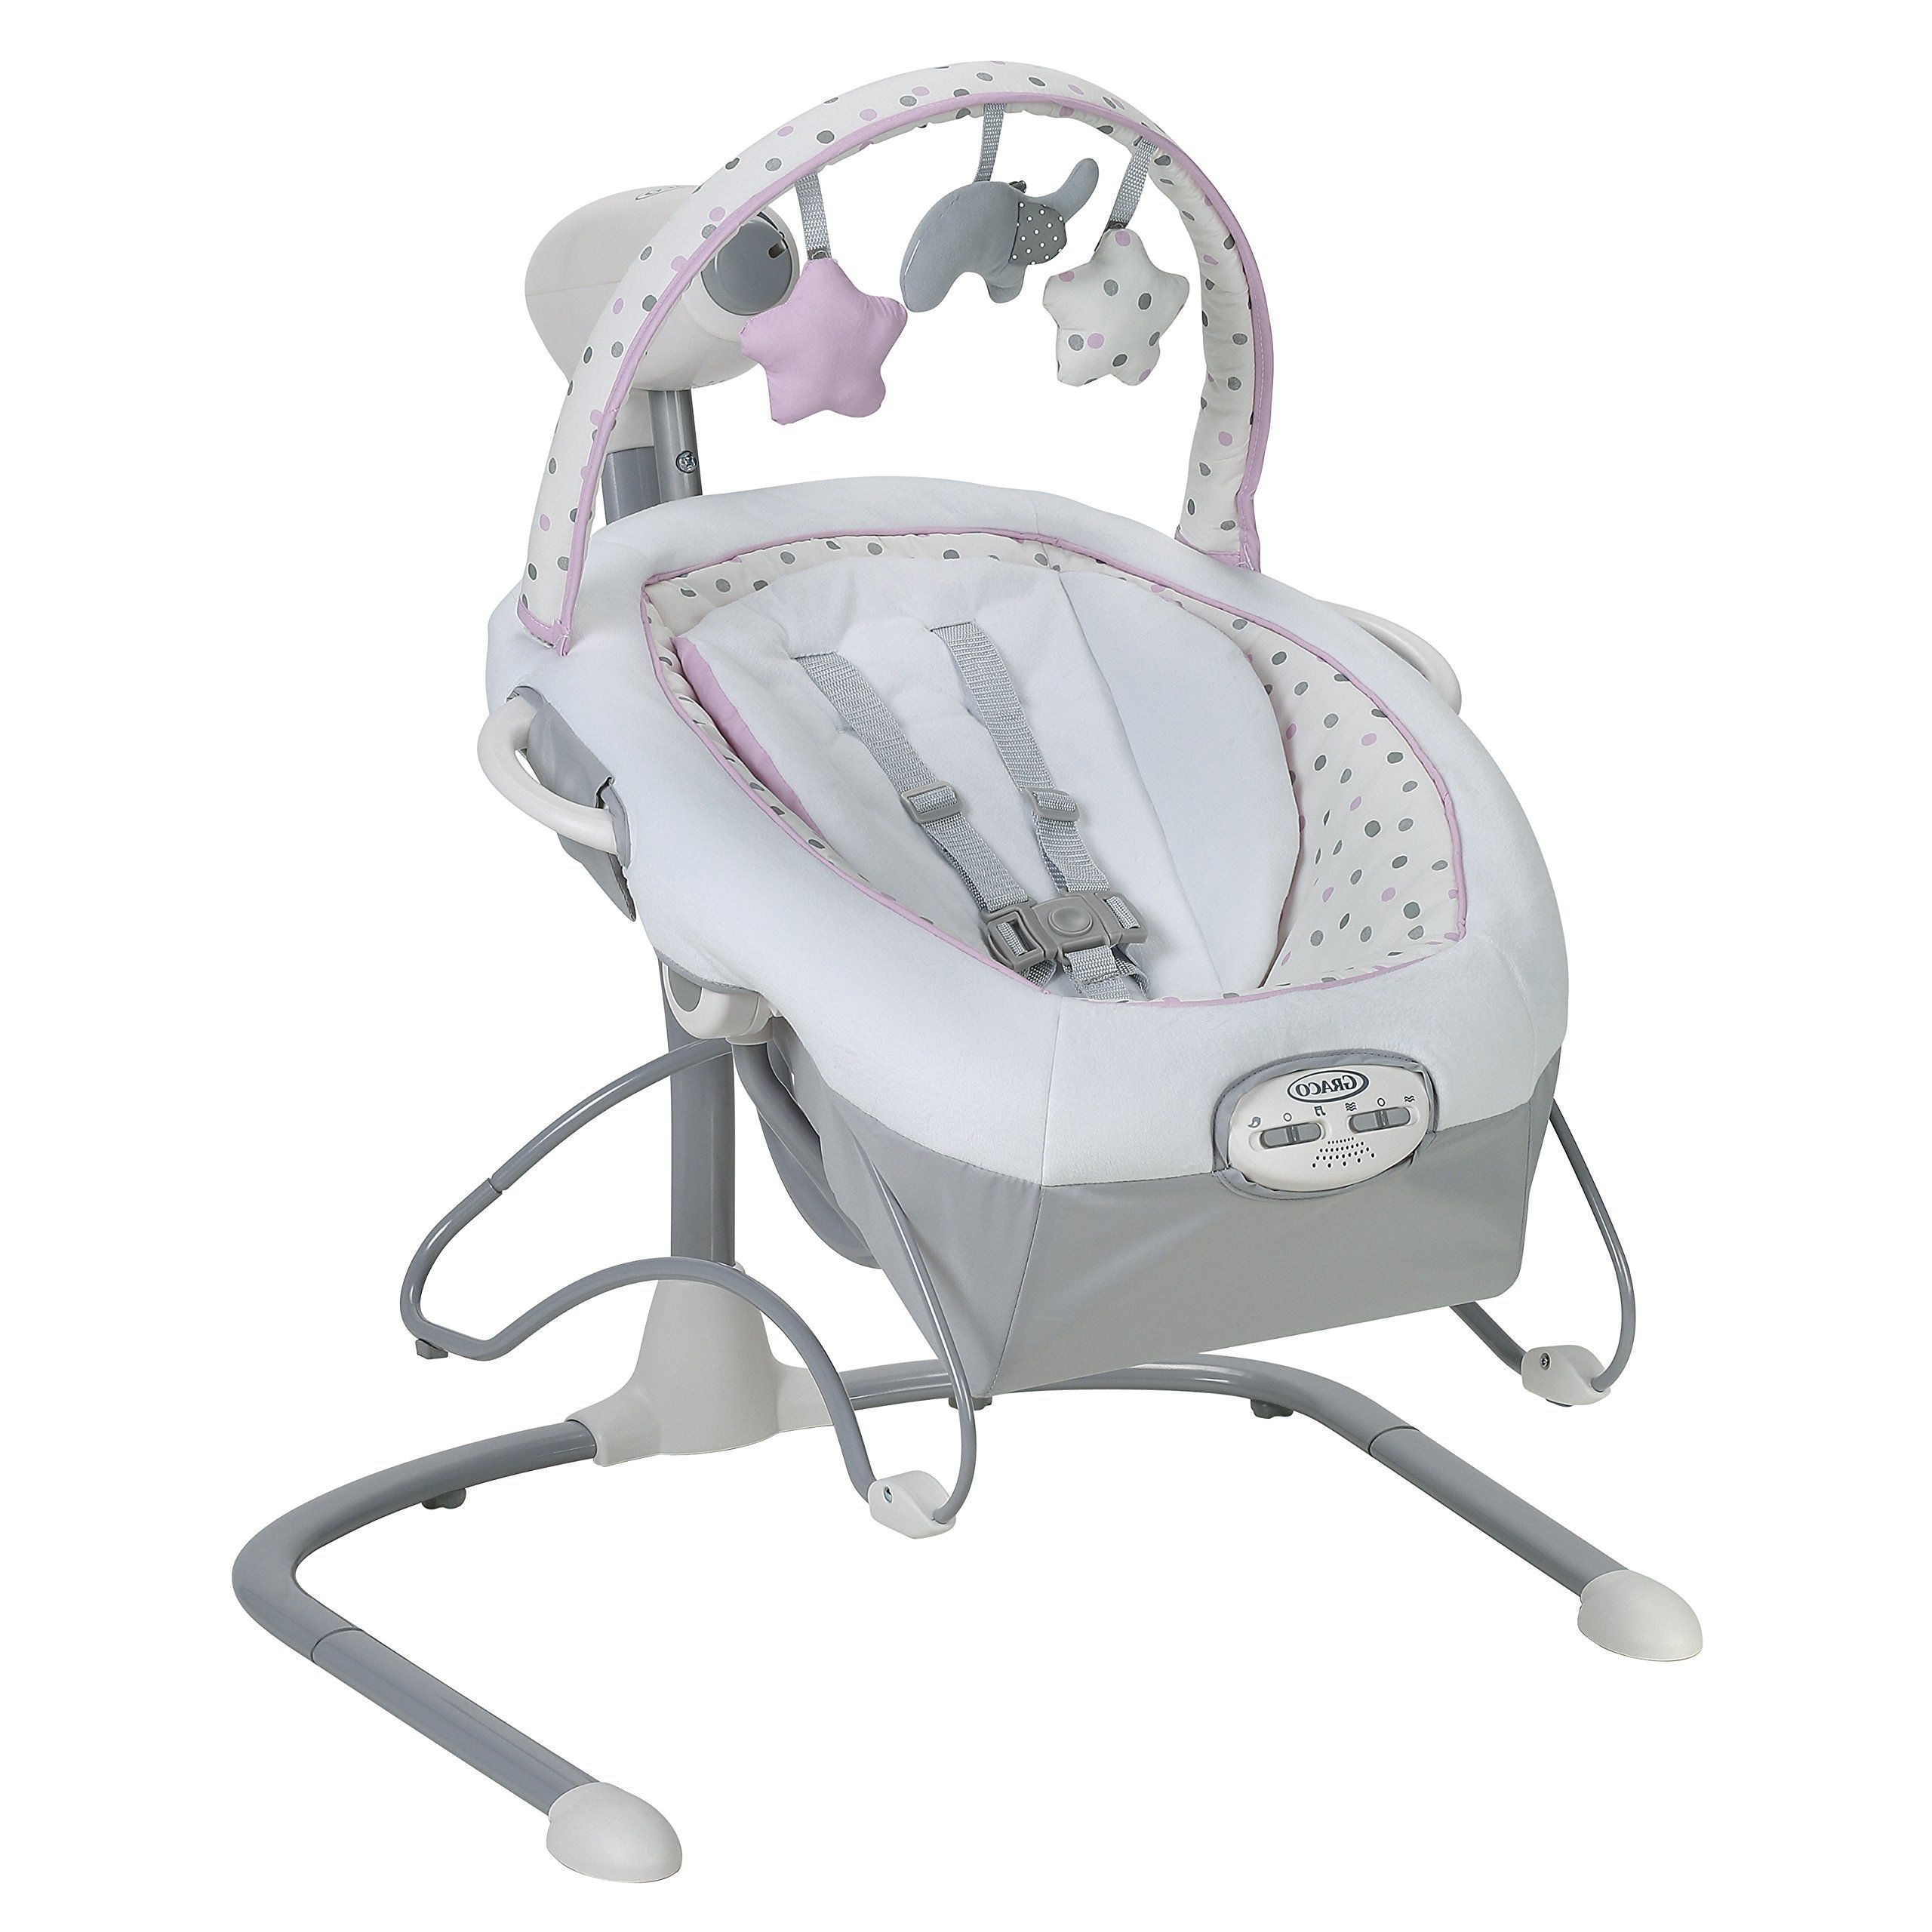 Buy Graco Duetconnect Swing And Bouncer, Bristol In Cheap Regarding Most Recent Bristol Porch Swings (View 29 of 30)